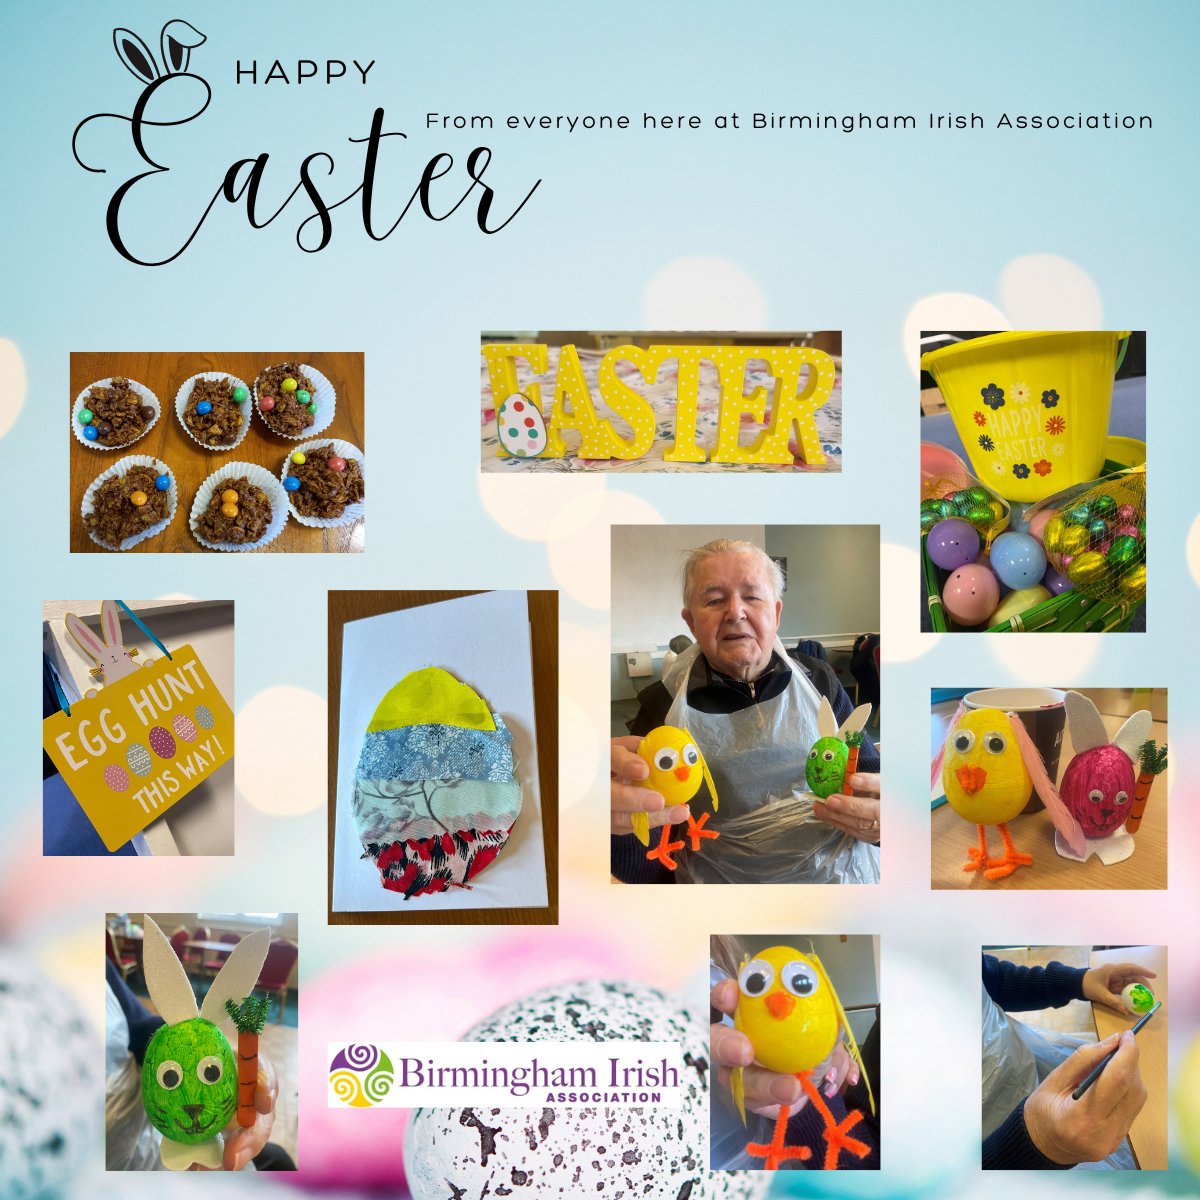 Happy Easter from everyone here at Birmingham Irish Association ✨🐣 Today we would like to share our Dementia Centre celebrations that have taken place throughout the week 💛 @IrelandEmbGB @dfatirl